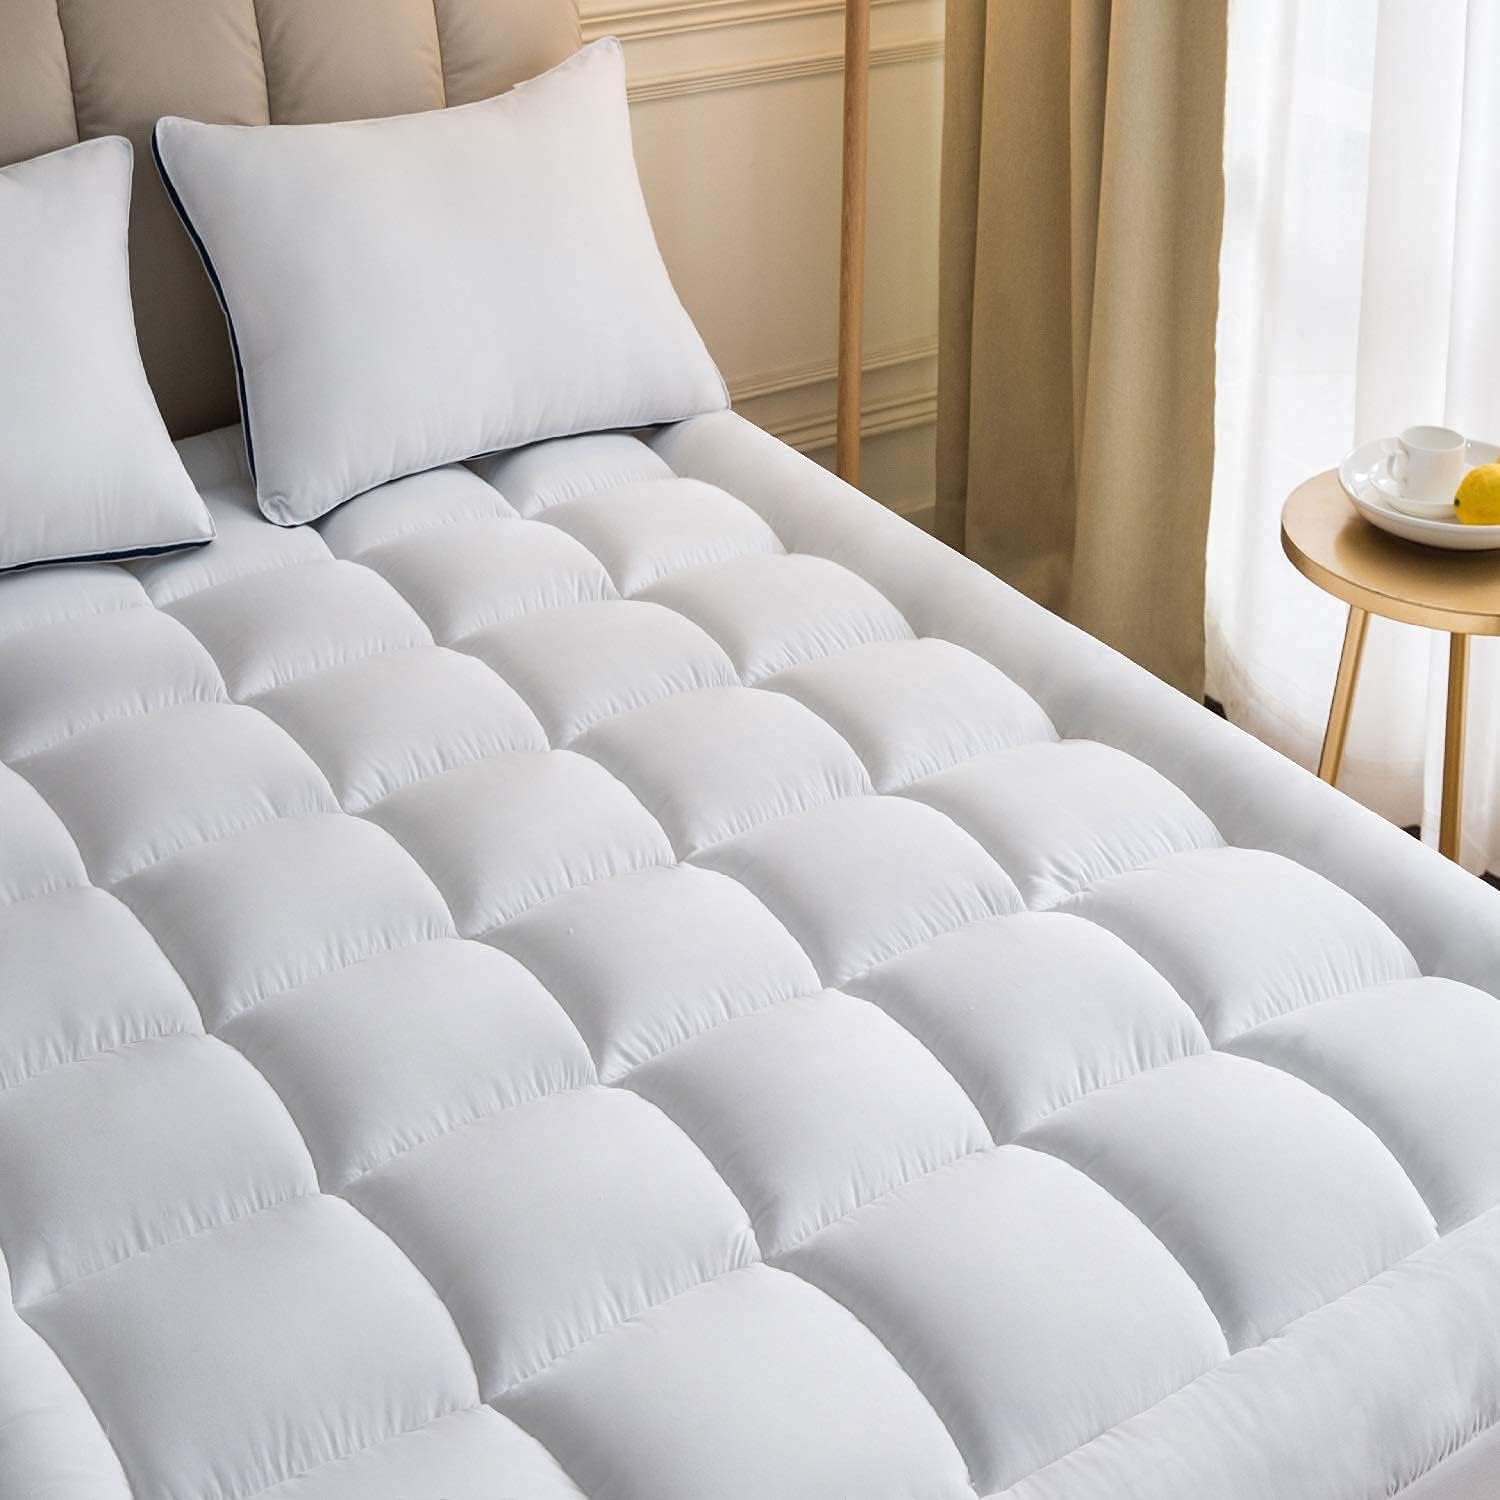 Mattress Topper Full 54x75 Inches Quilted Back Pain Relief Plush Down Alternative Pillow Top Fitted Skirt Protector Cooling Mattress Pad Deep Pocket Fits 20 Inches Soft White